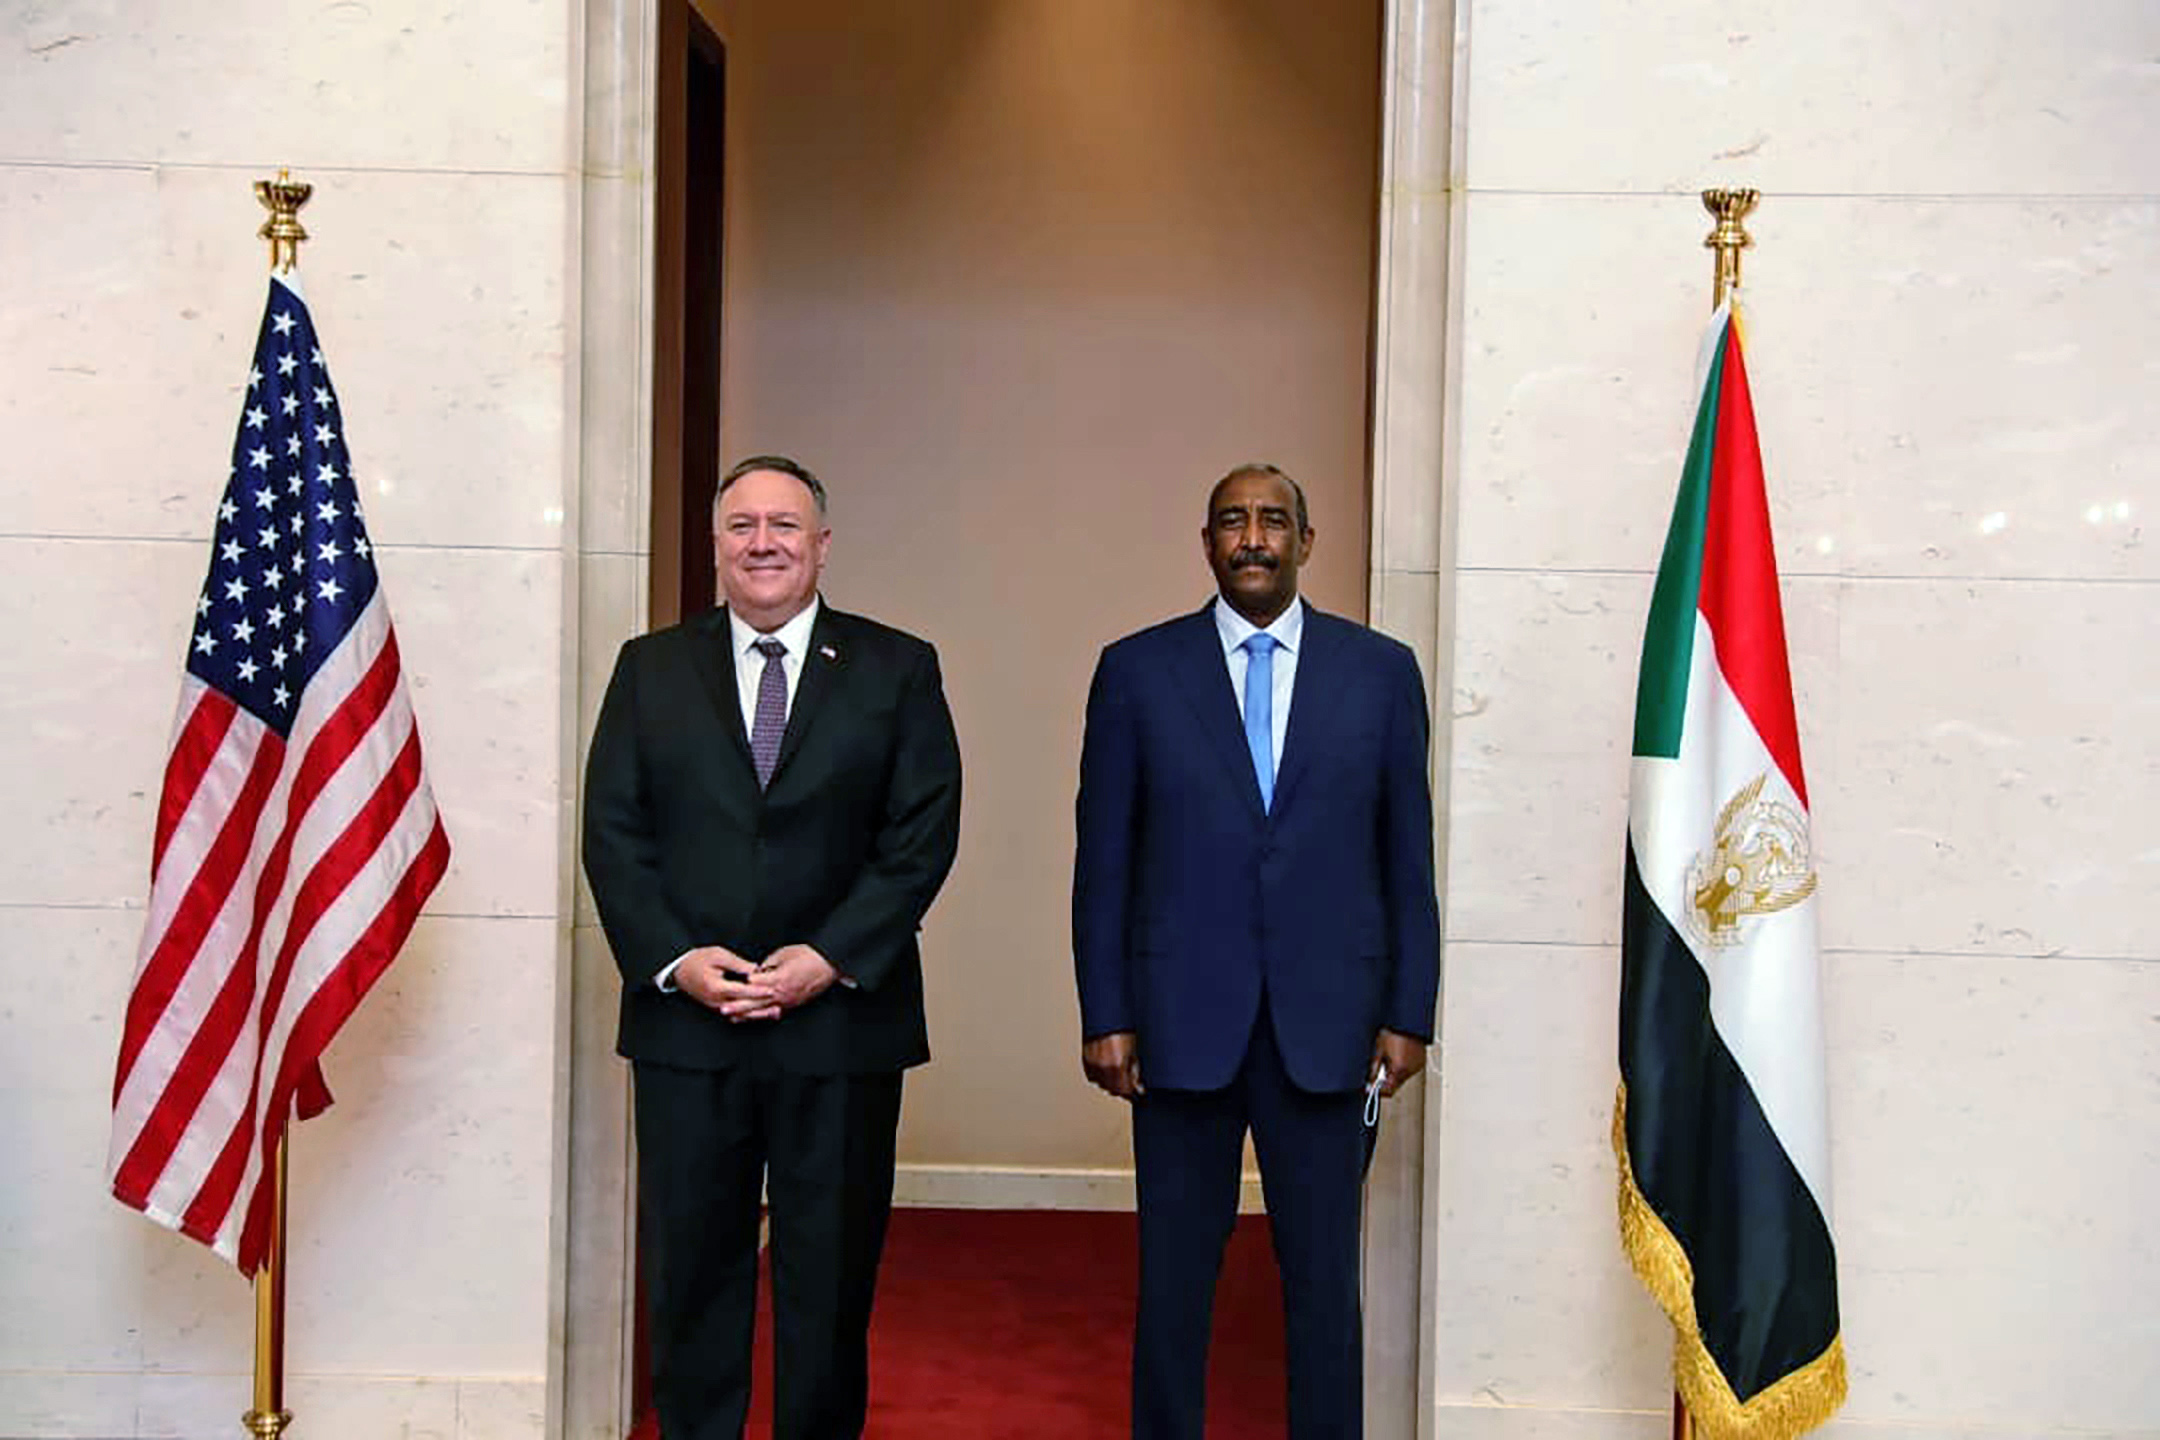 PHOTO: Secretary of State Mike Pompeo stands with Sudanese Gen. Abdel-Fattah Burhan, the head of the ruling sovereign council, in Khartoum, Sudan, Aug. 25, 2020.